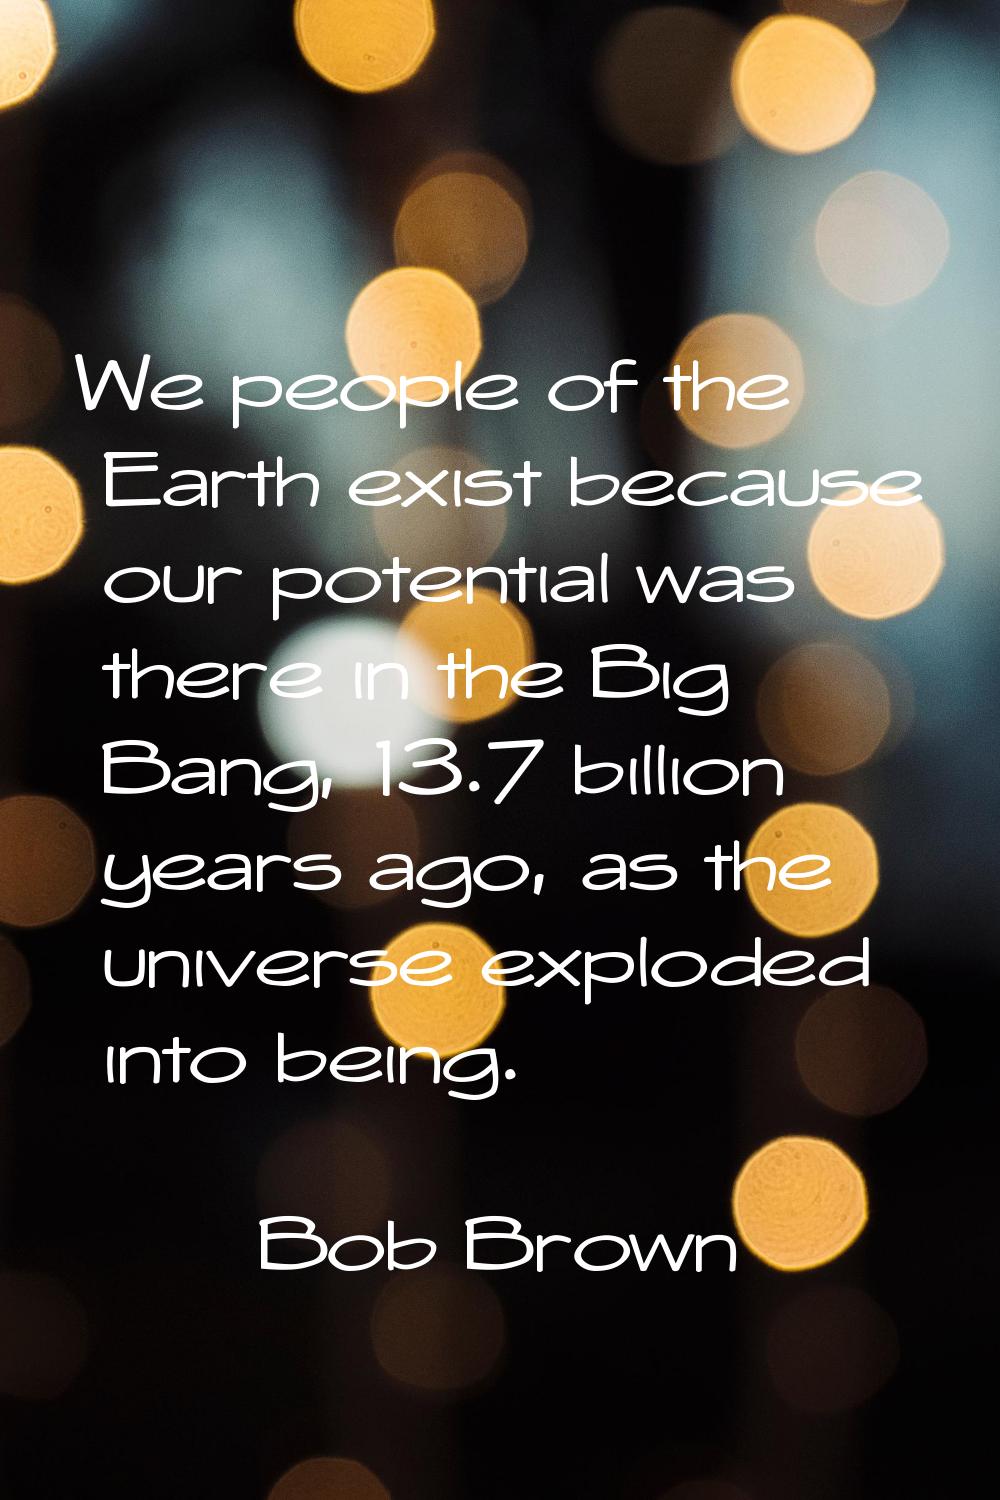 We people of the Earth exist because our potential was there in the Big Bang, 13.7 billion years ag